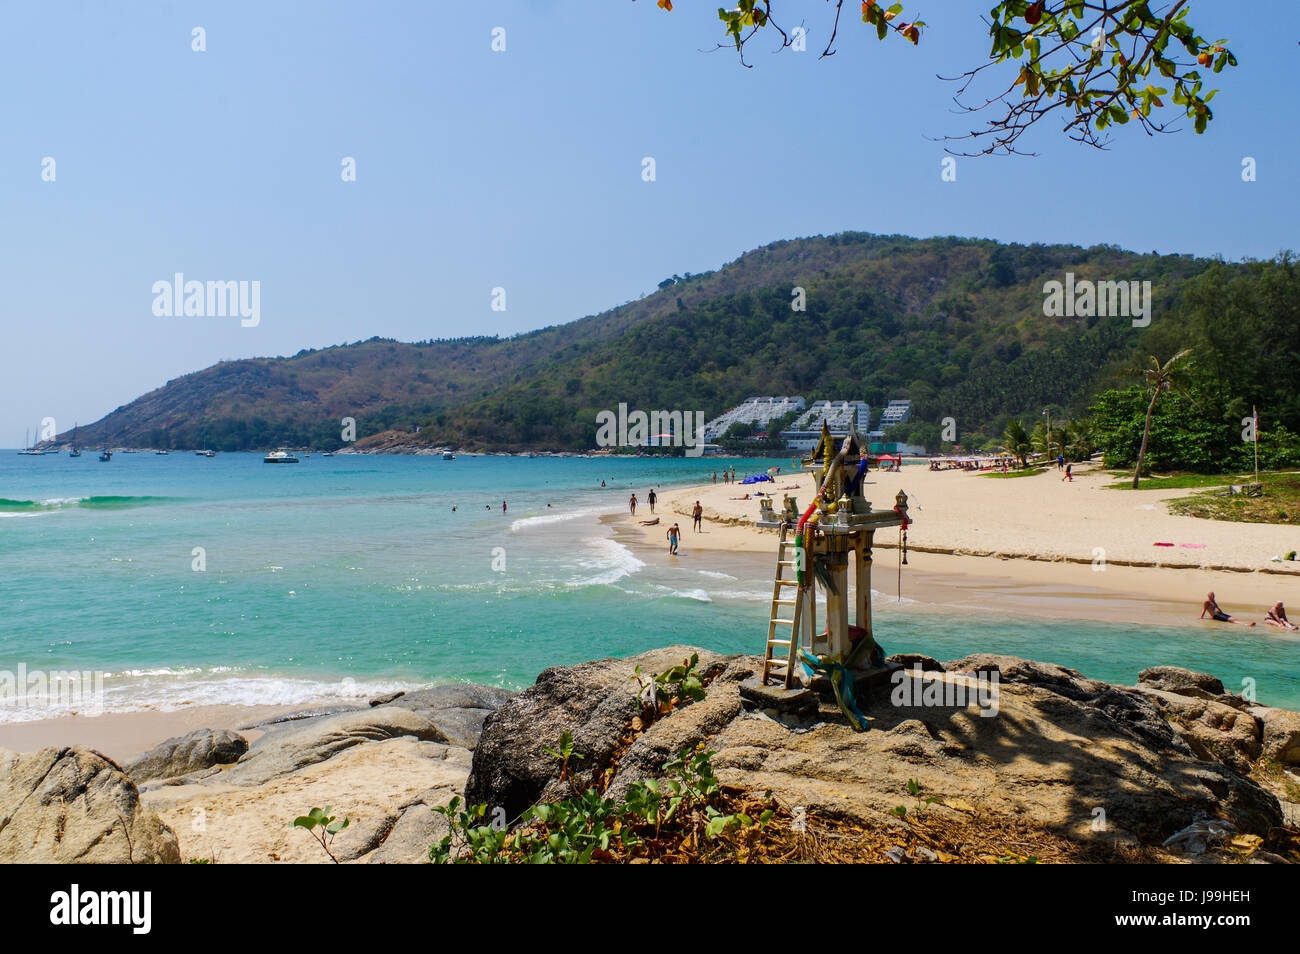 a landscape from Phuket View Point at Nai Harn Beach Located in Phuket Province, Thailand. Stock Photo